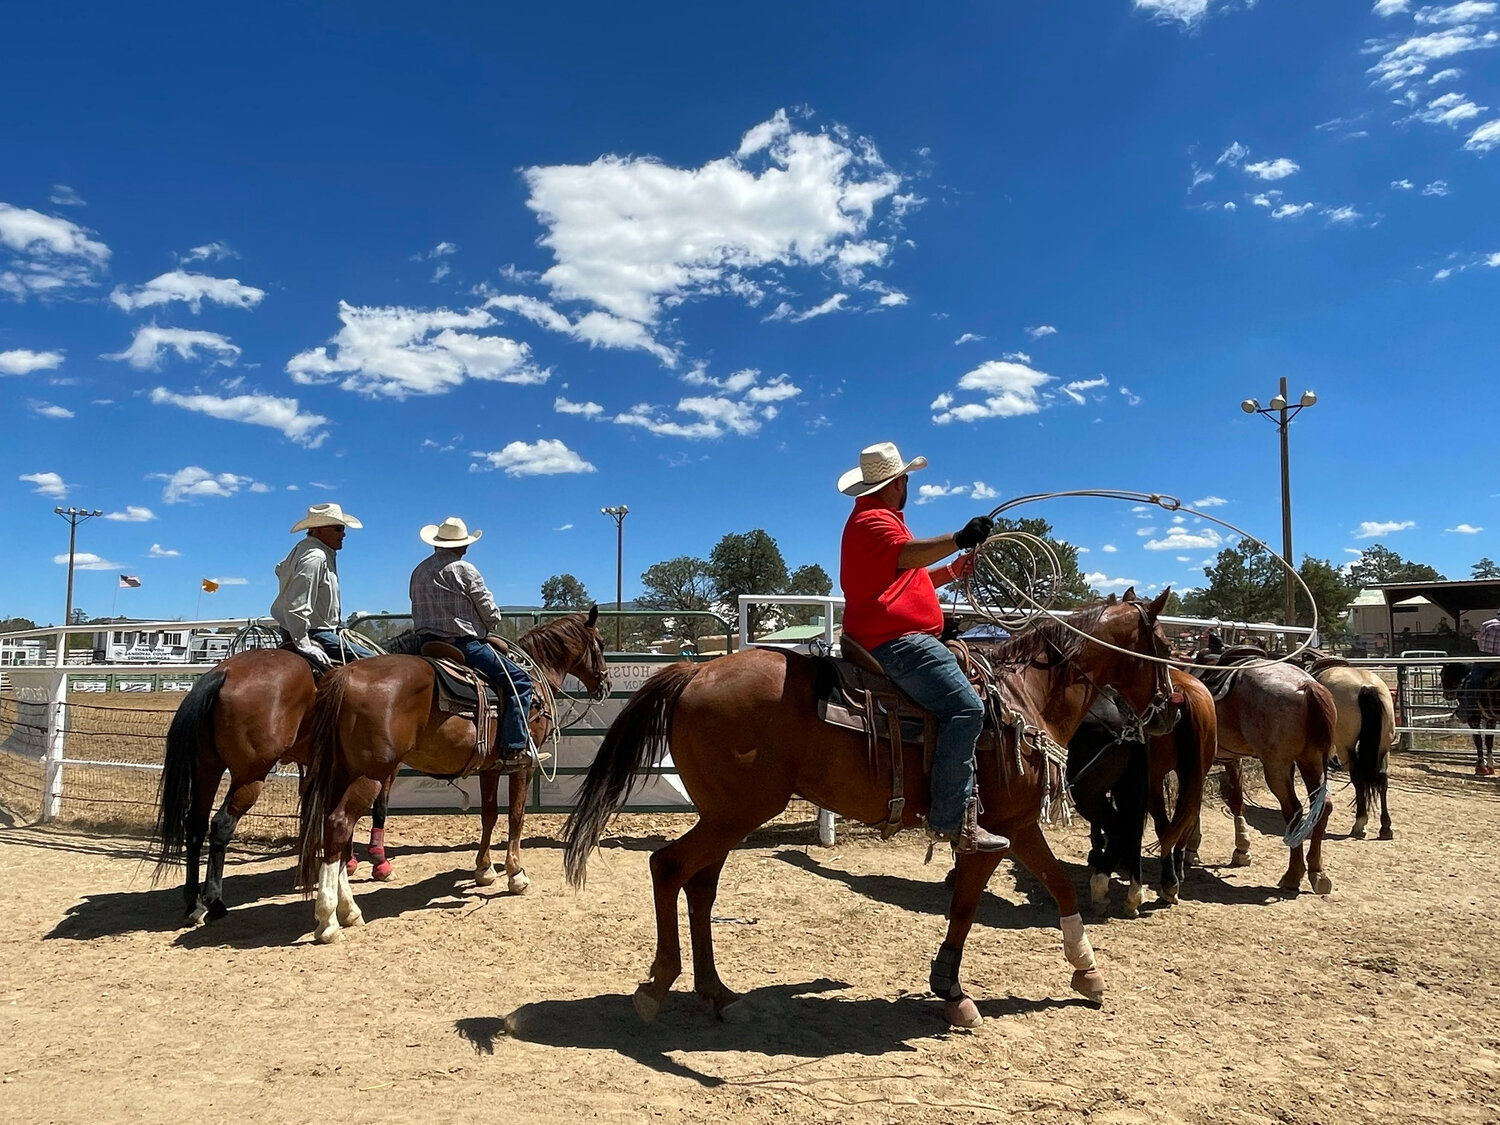 Cowboys await their turn during the roping contests at the Sandoval County Fair on Aug. 5.